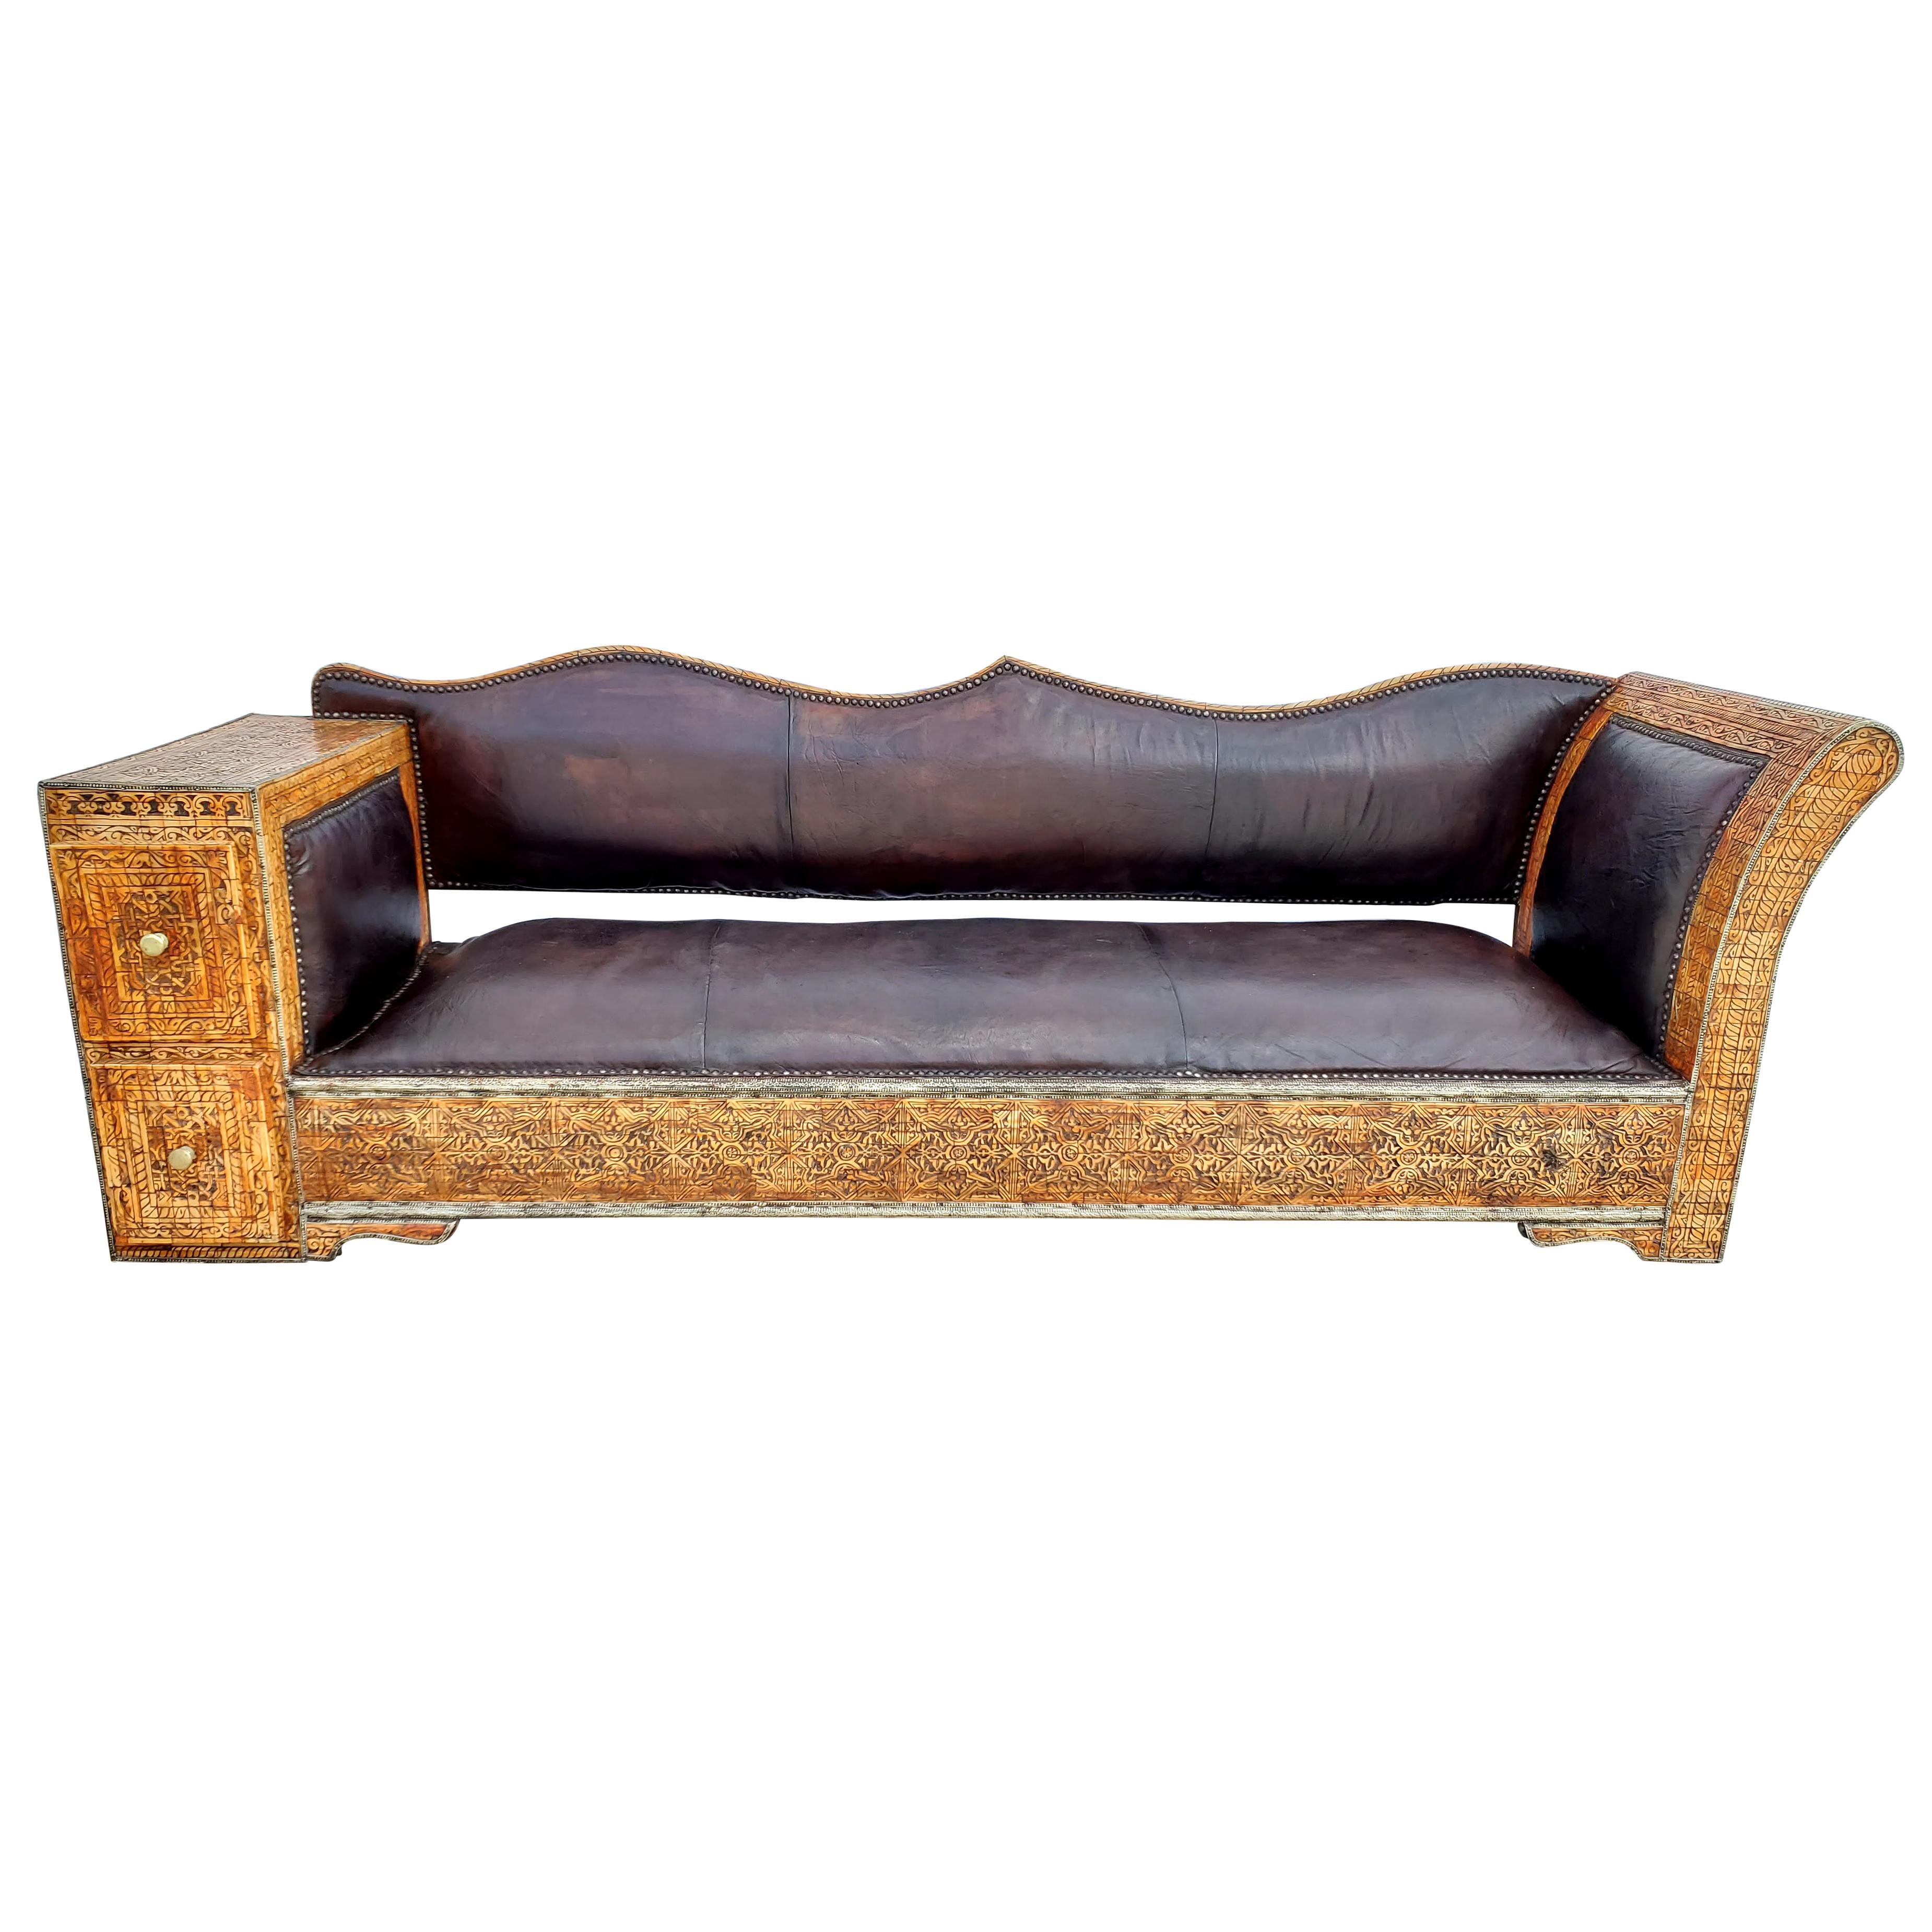 Rare and Unique Morocan Leather Sofa or Bench For Sale